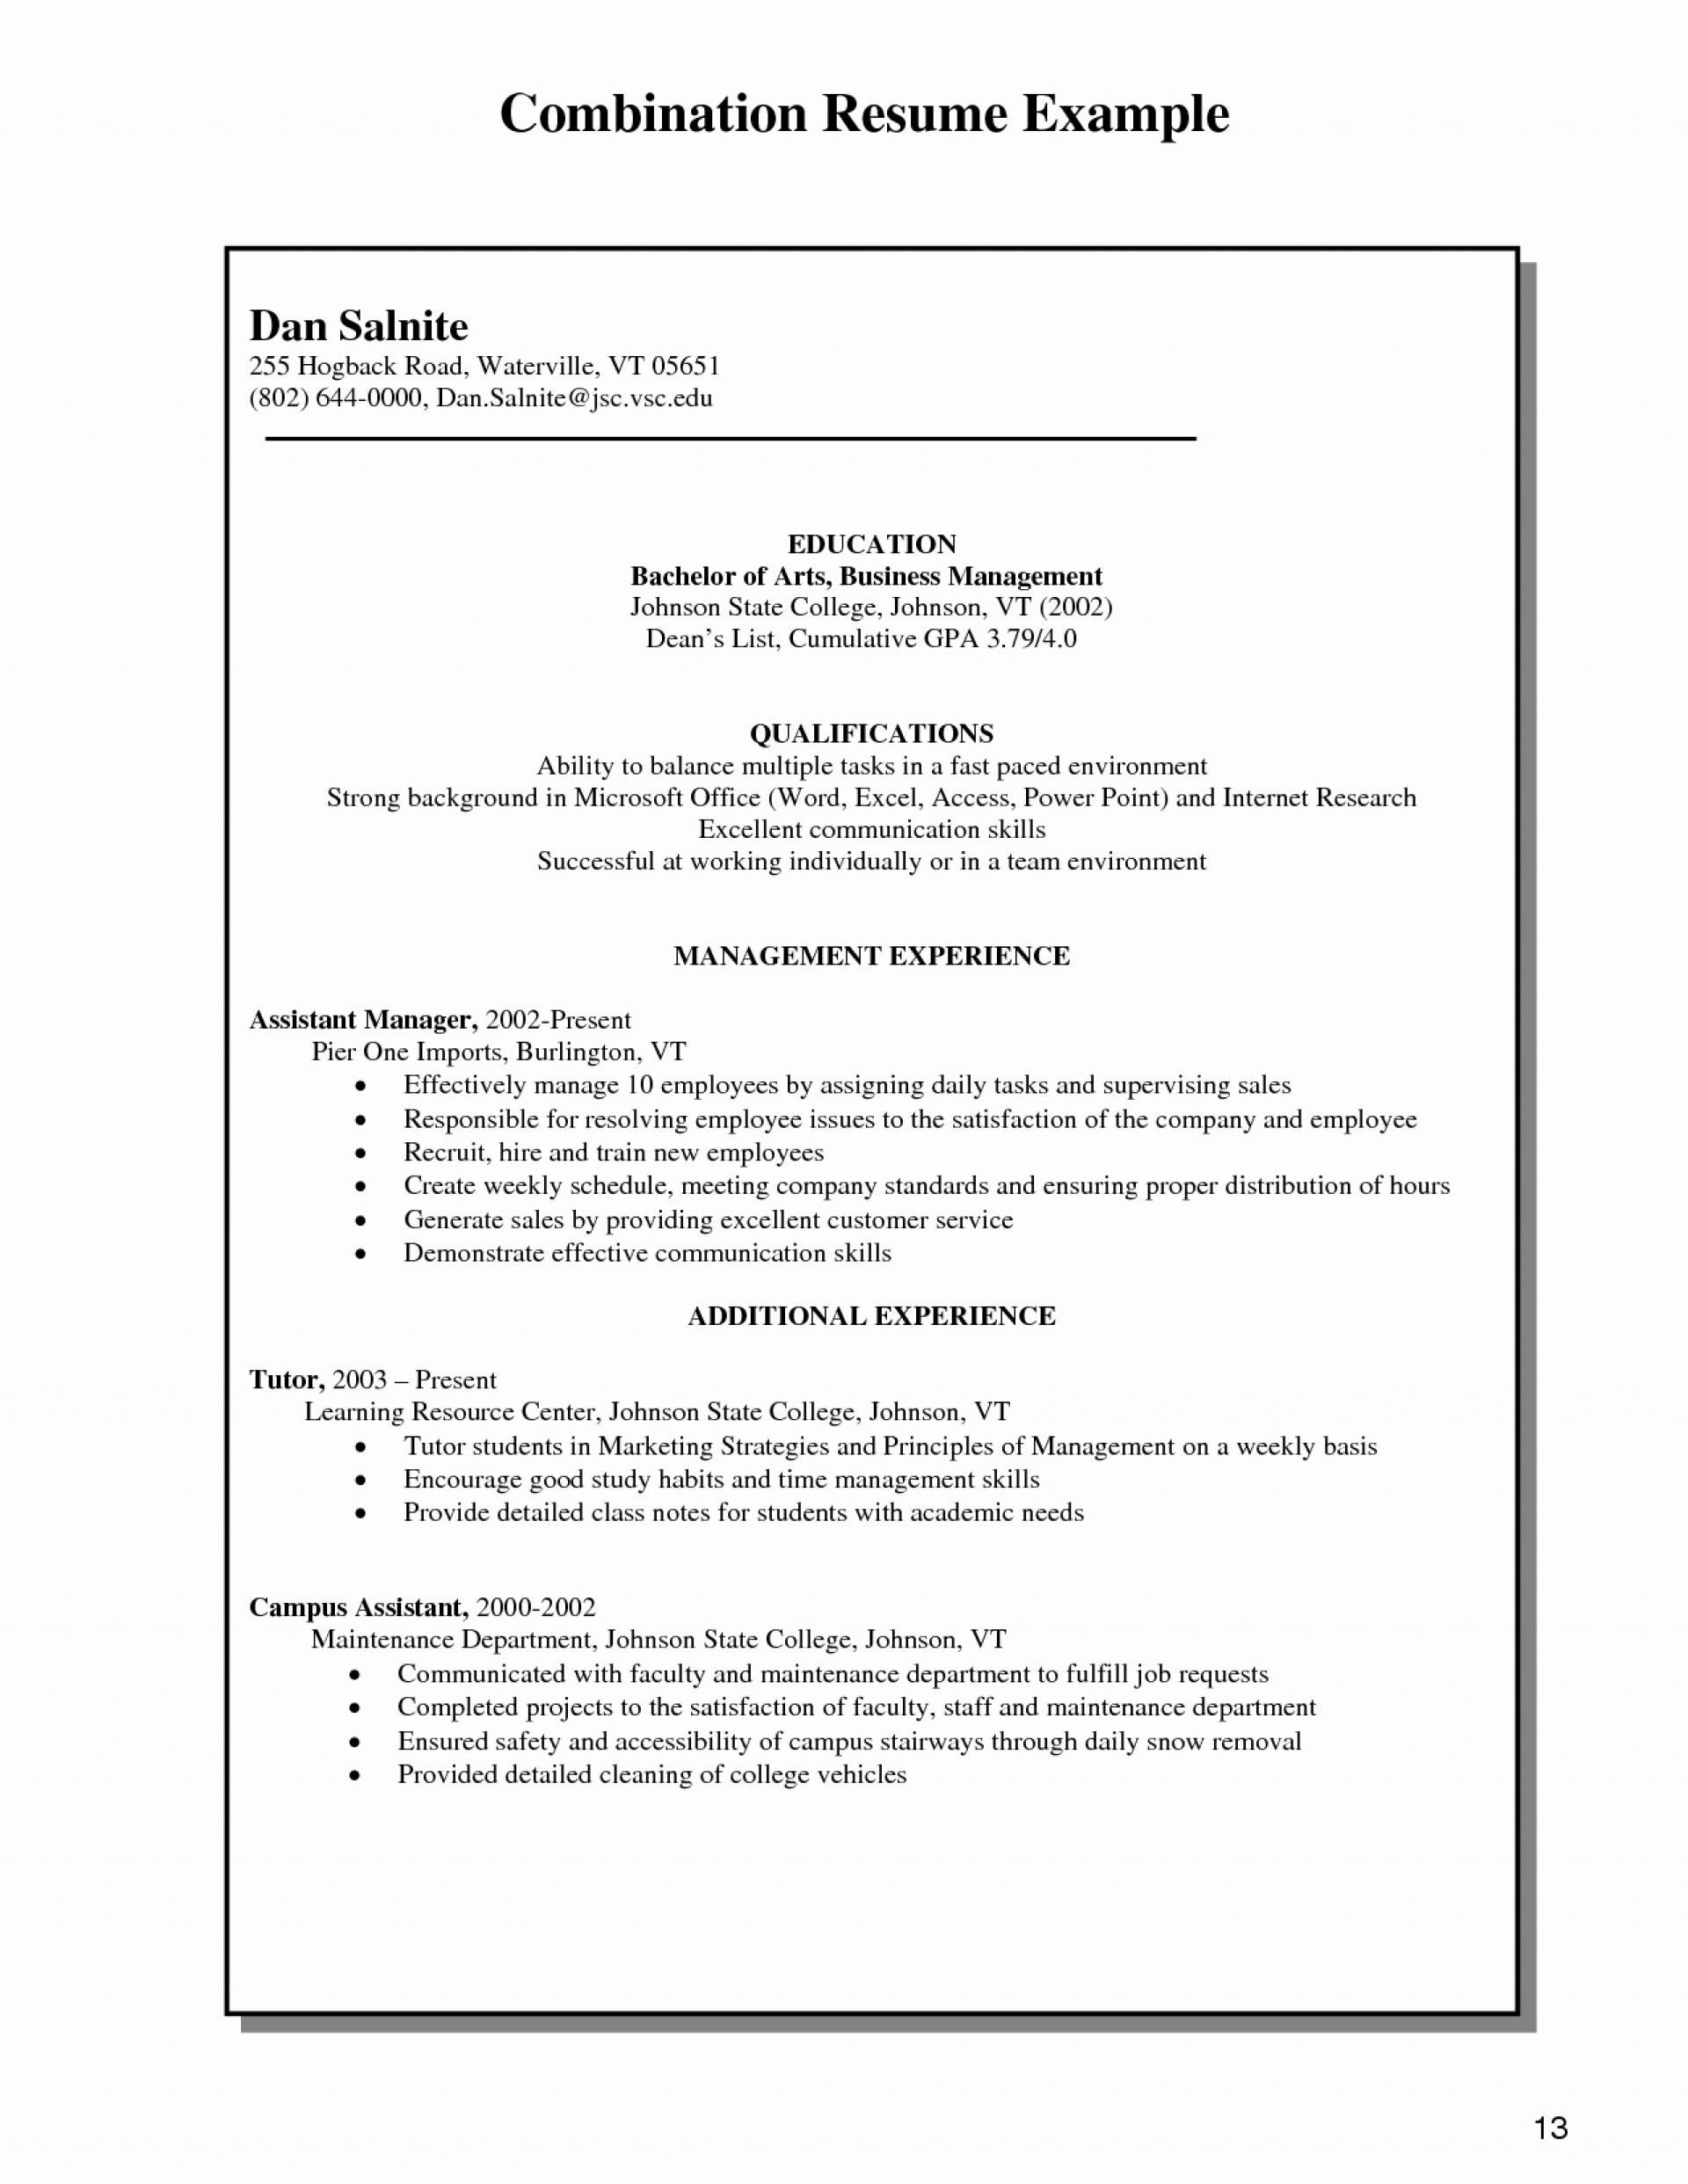 029 Combination Resume Template Word Free Templates 27 1 Throughout Combination Resume Template Word